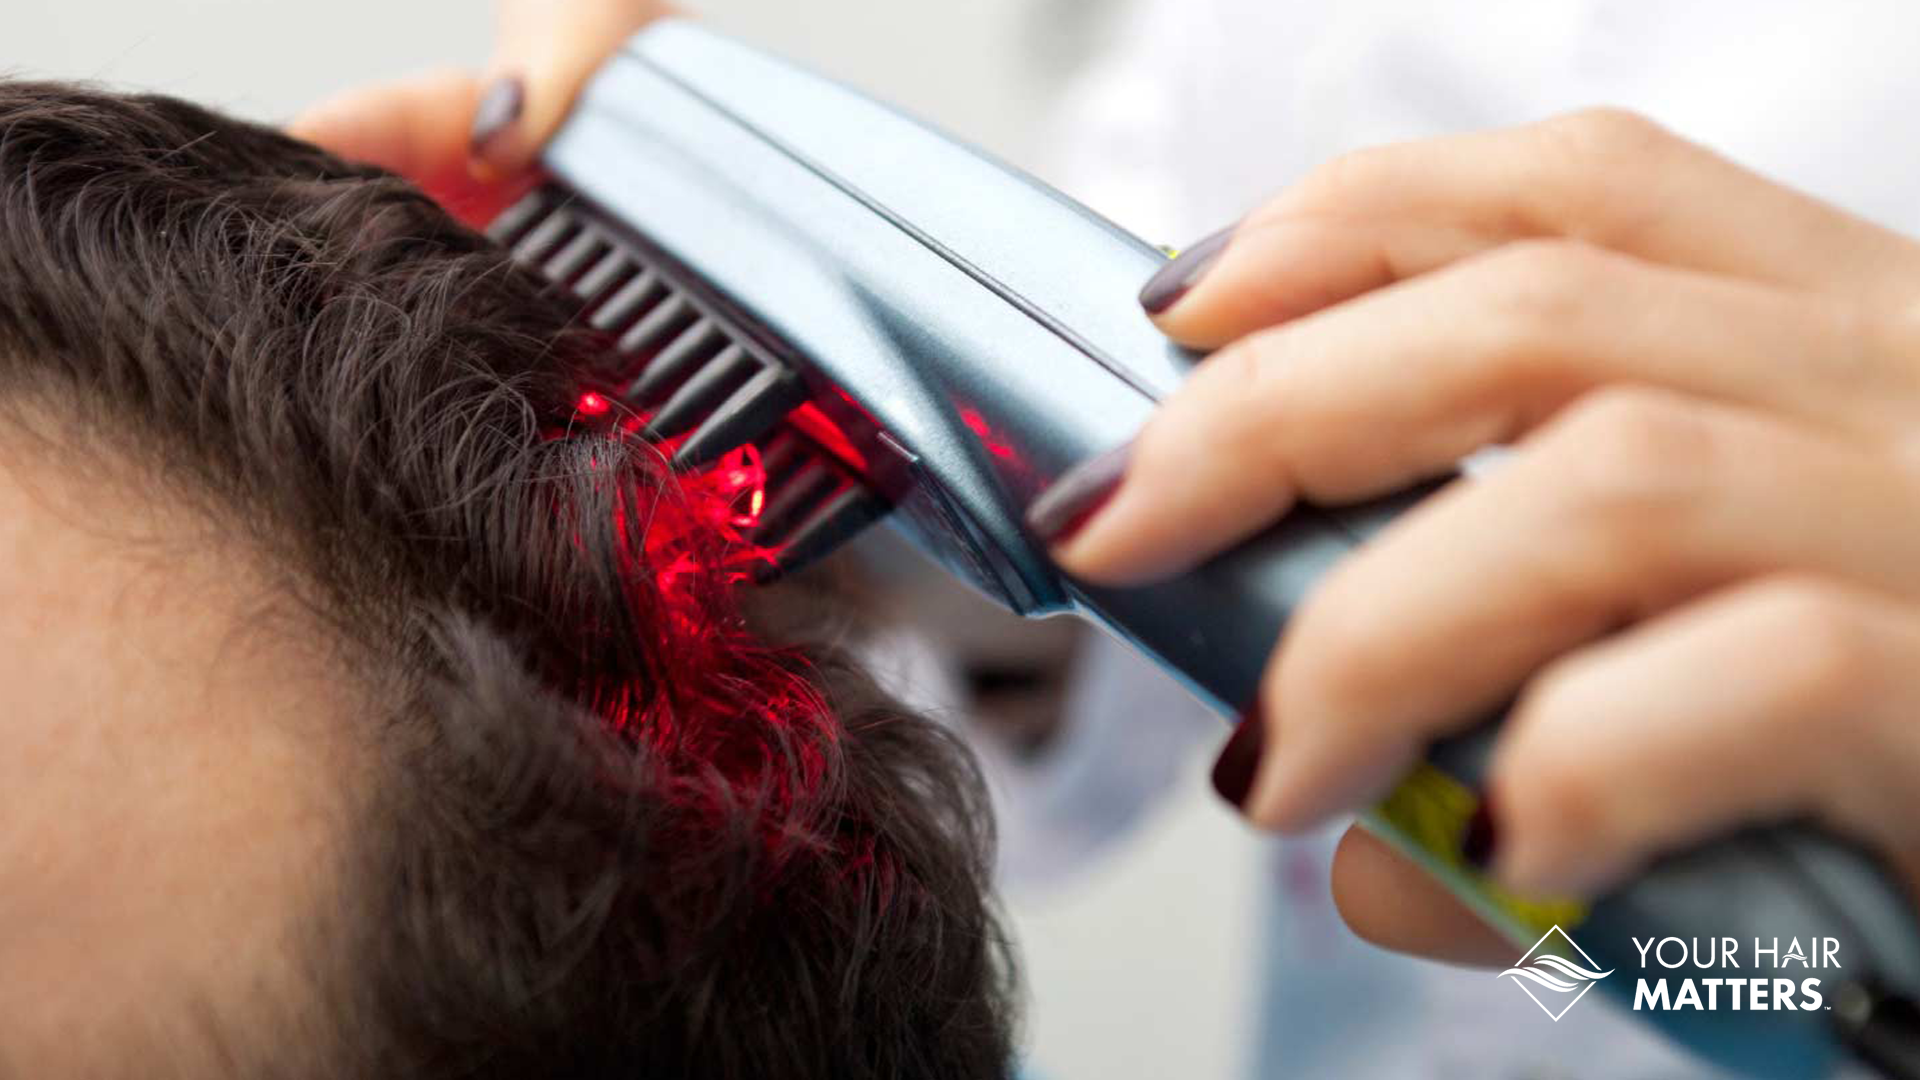 Laser Hair Therapy | Your Hair Matters | Stimulate Hair Regrowth | Hair Thinning | Male Patter Baldness | YOURS | Consultation | Whole Sale Hair Systems